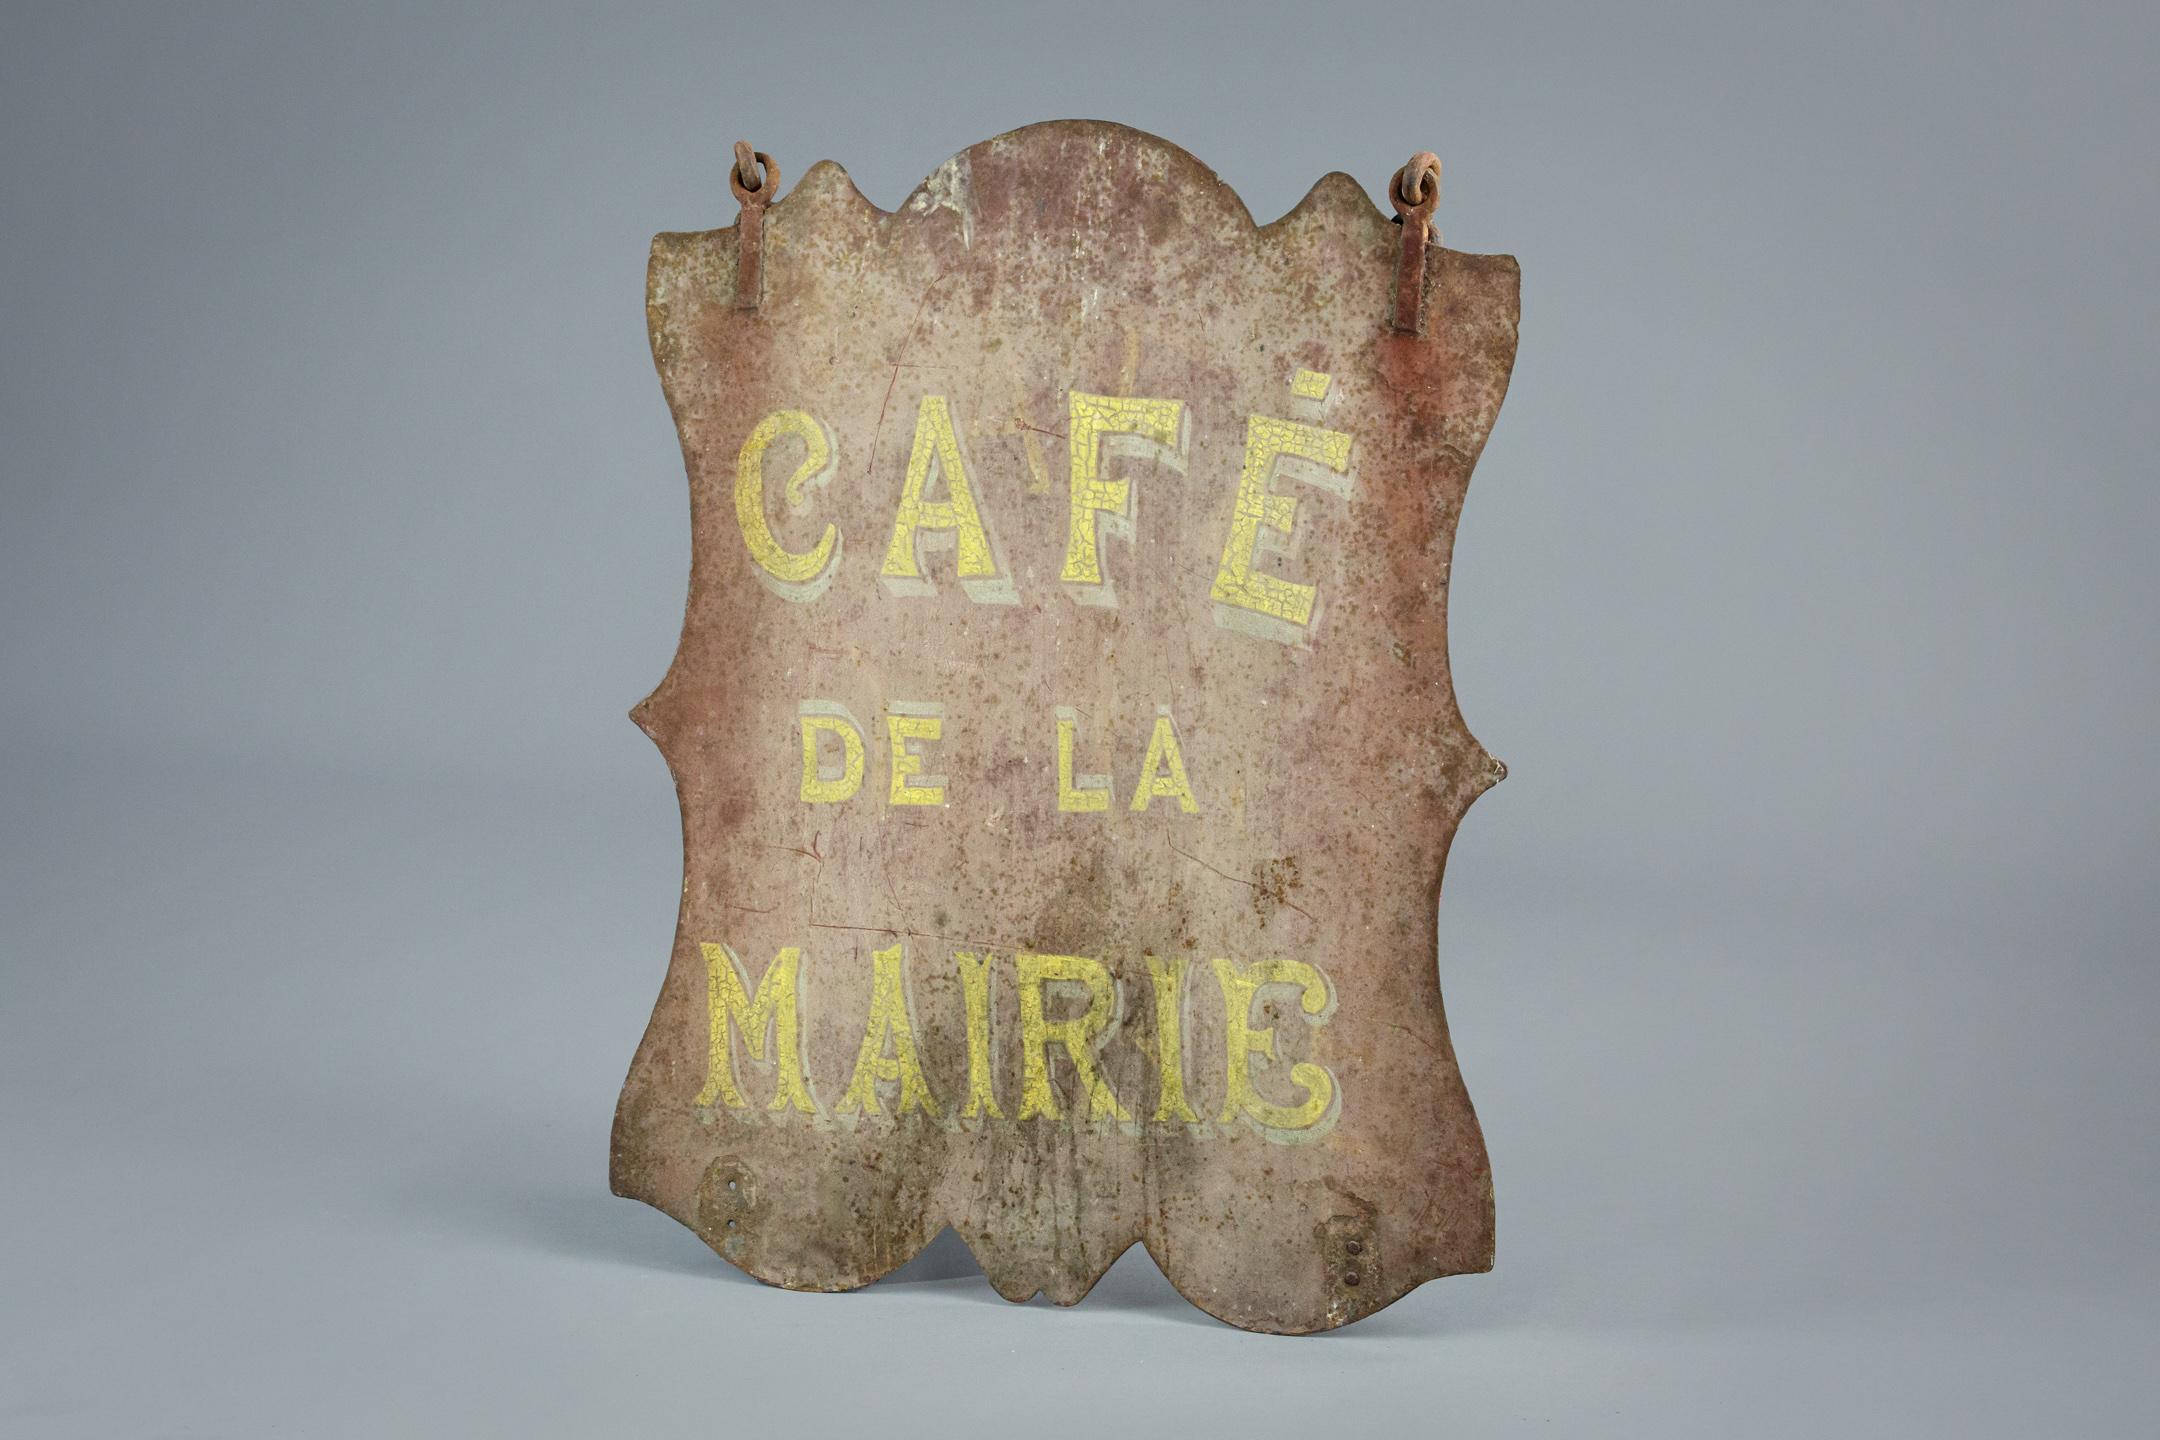 Original double sided heavy gauge sheet metal sign with original fixing points. Cafe de la Mairie. Similar condition and fading to both sides. France Circa 1880.
   